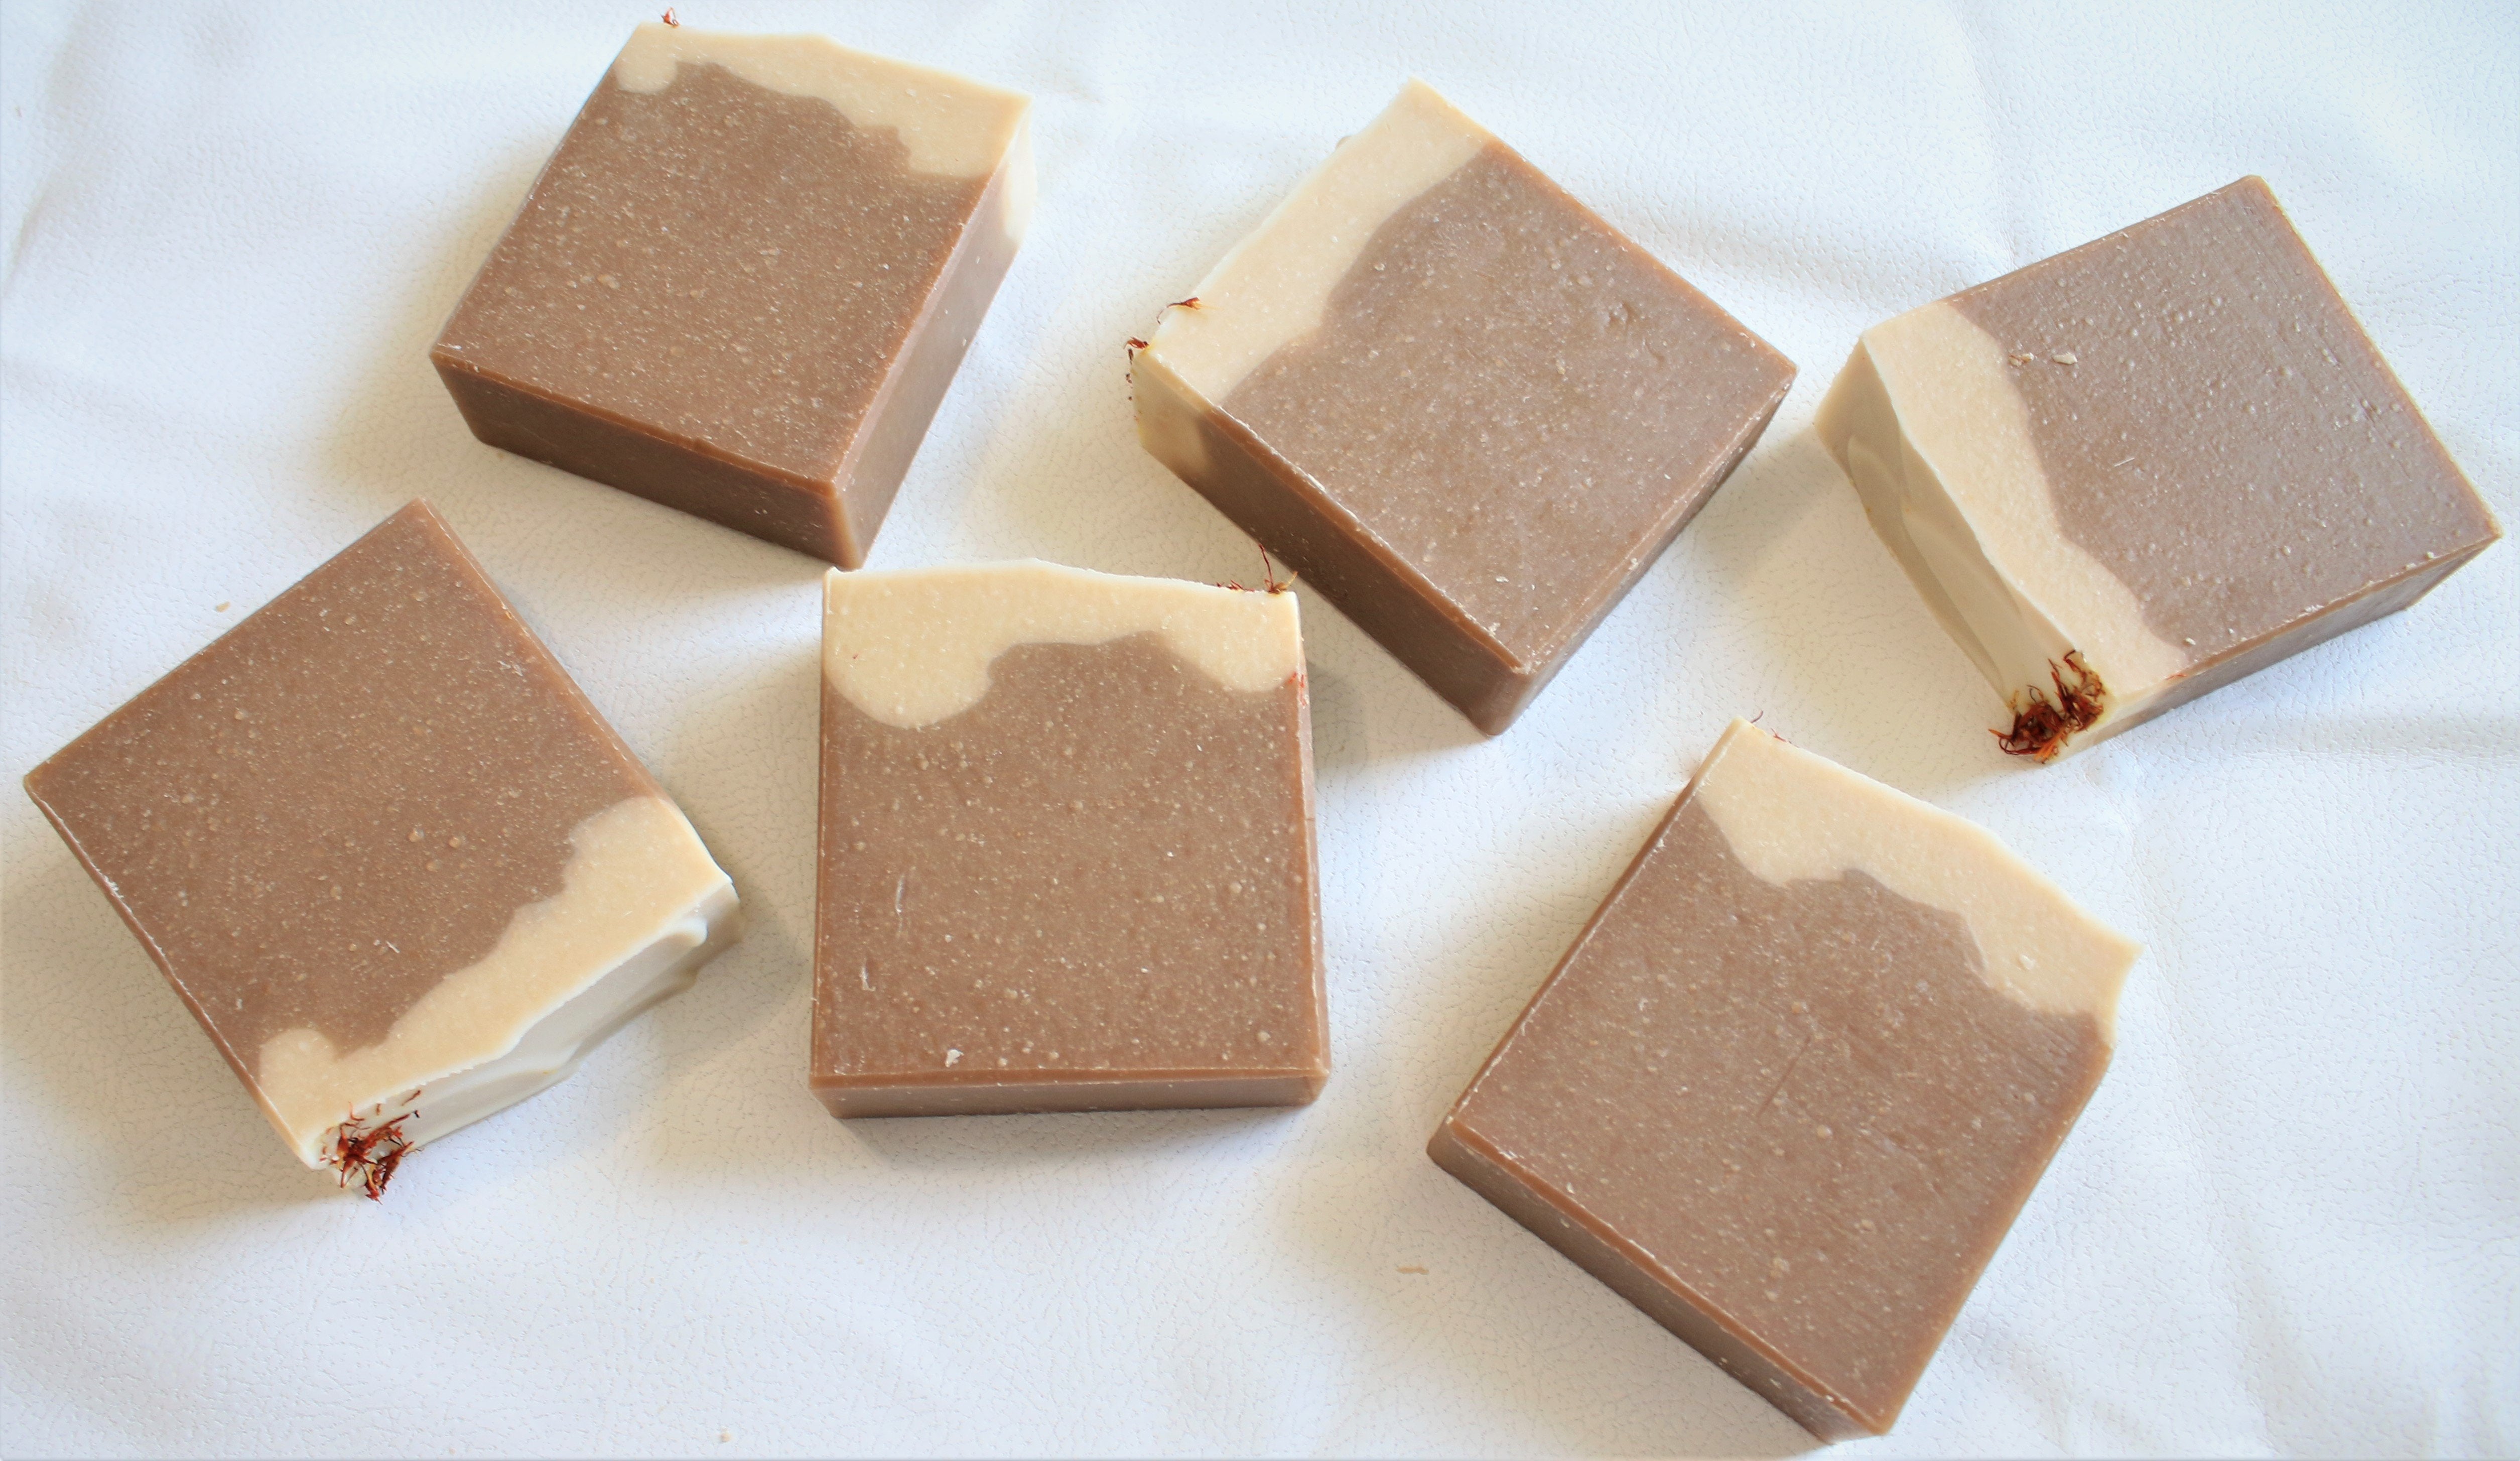 Beer soap made in Toronto